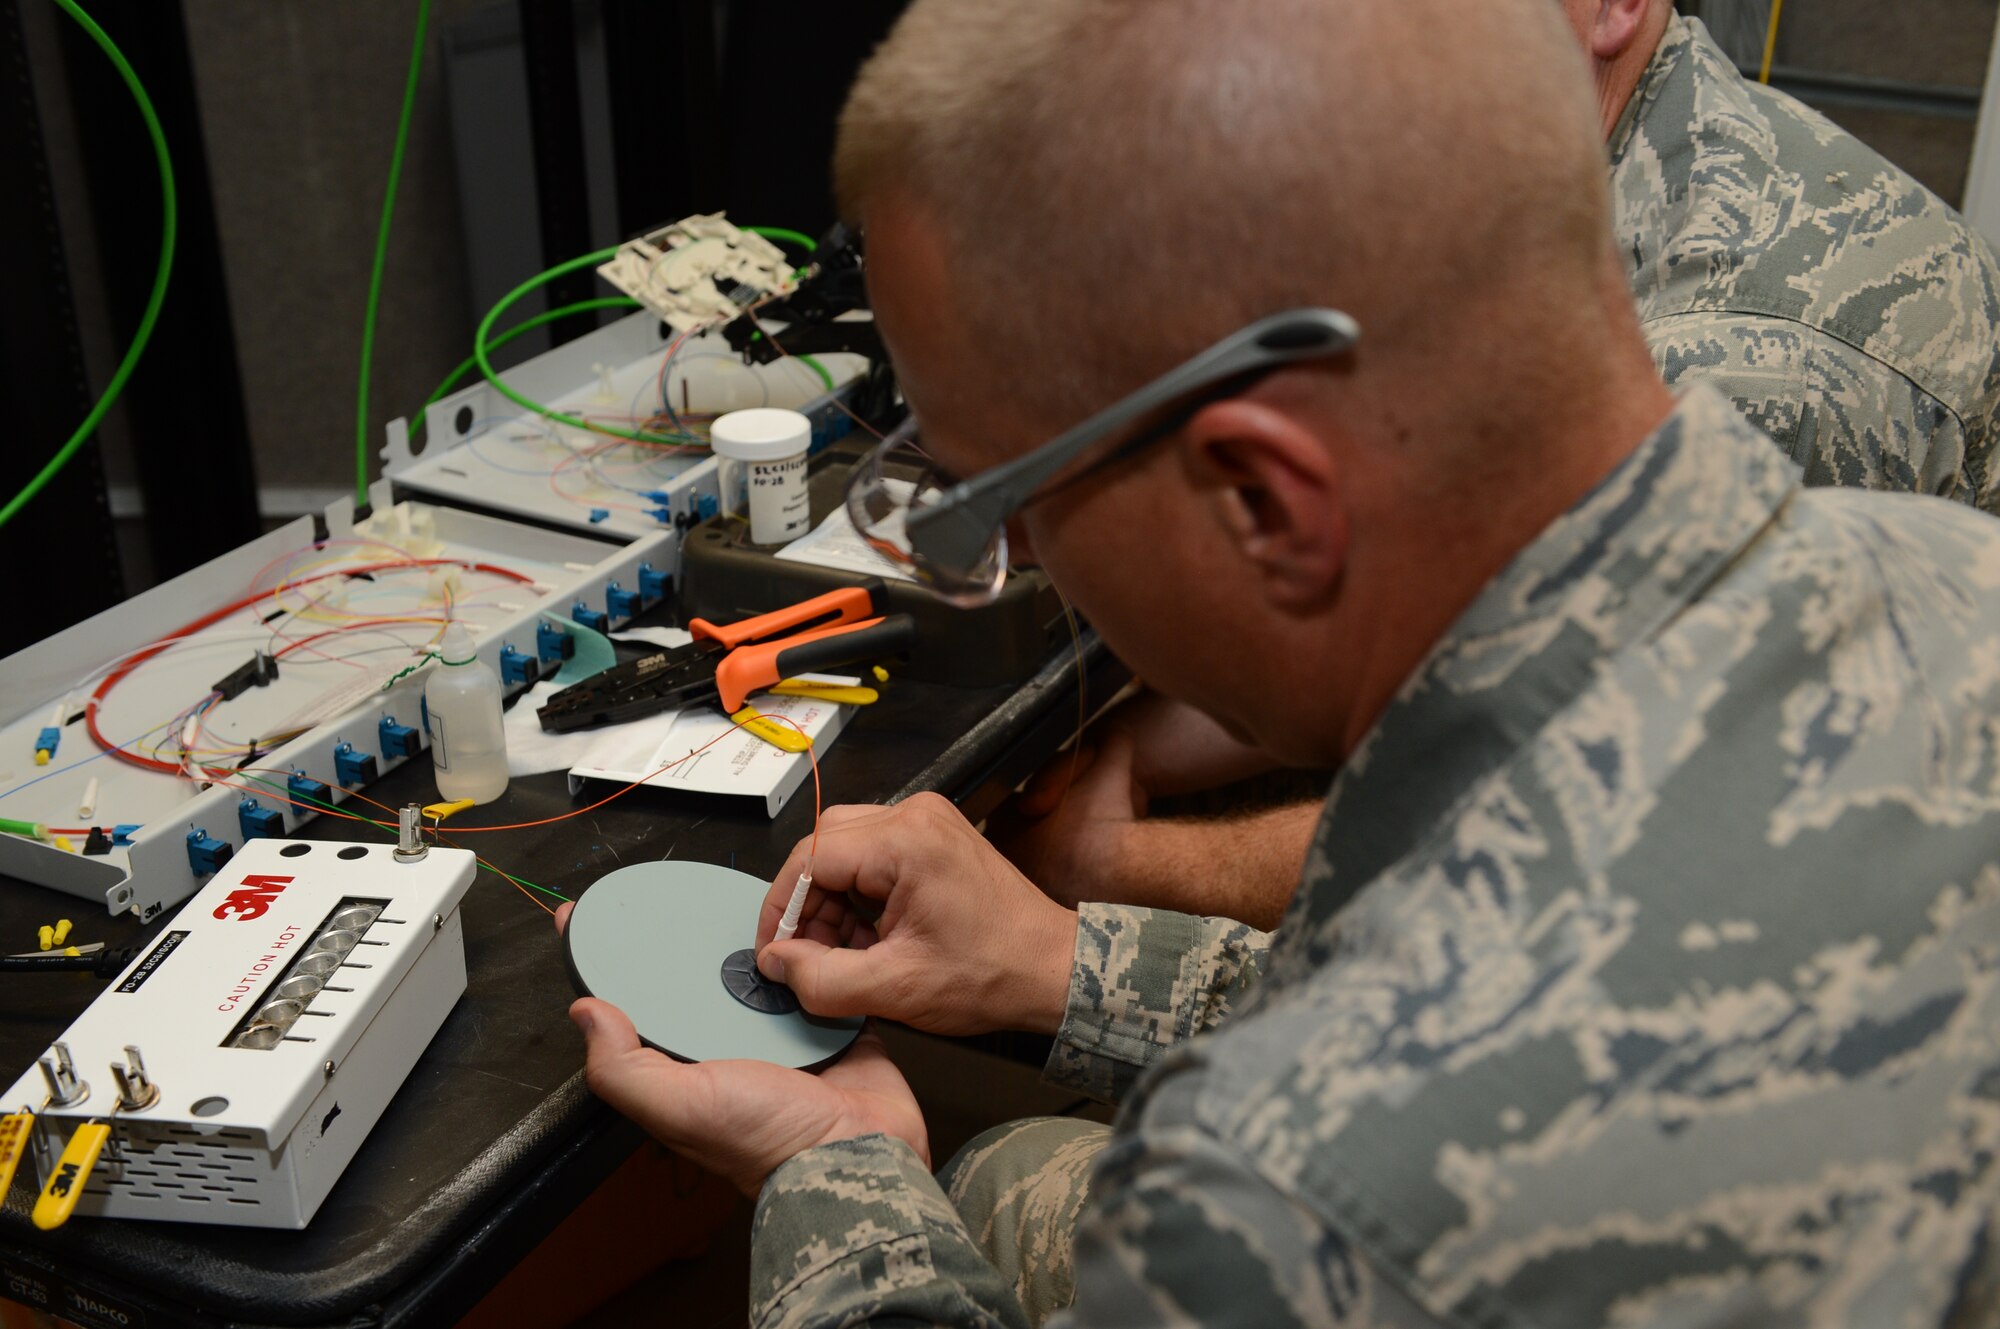 SPANGDAHLEM AIR BASE, Germany – U.S. Air Force Chief Master Sgt. Matthew Grengs, 52nd Fighter Wing command chief master sergeant, polishes the end of a fiber optic cable with fine sandpaper Aug. 14, 2013. Polishing the fiber is necessary to remove excess epoxy. Fiber optic cables are used for mass data transfers that support more than 60 terabits of data per strand. (U.S. Air Force photo by Airman 1st Class Kyle Gese/Released)